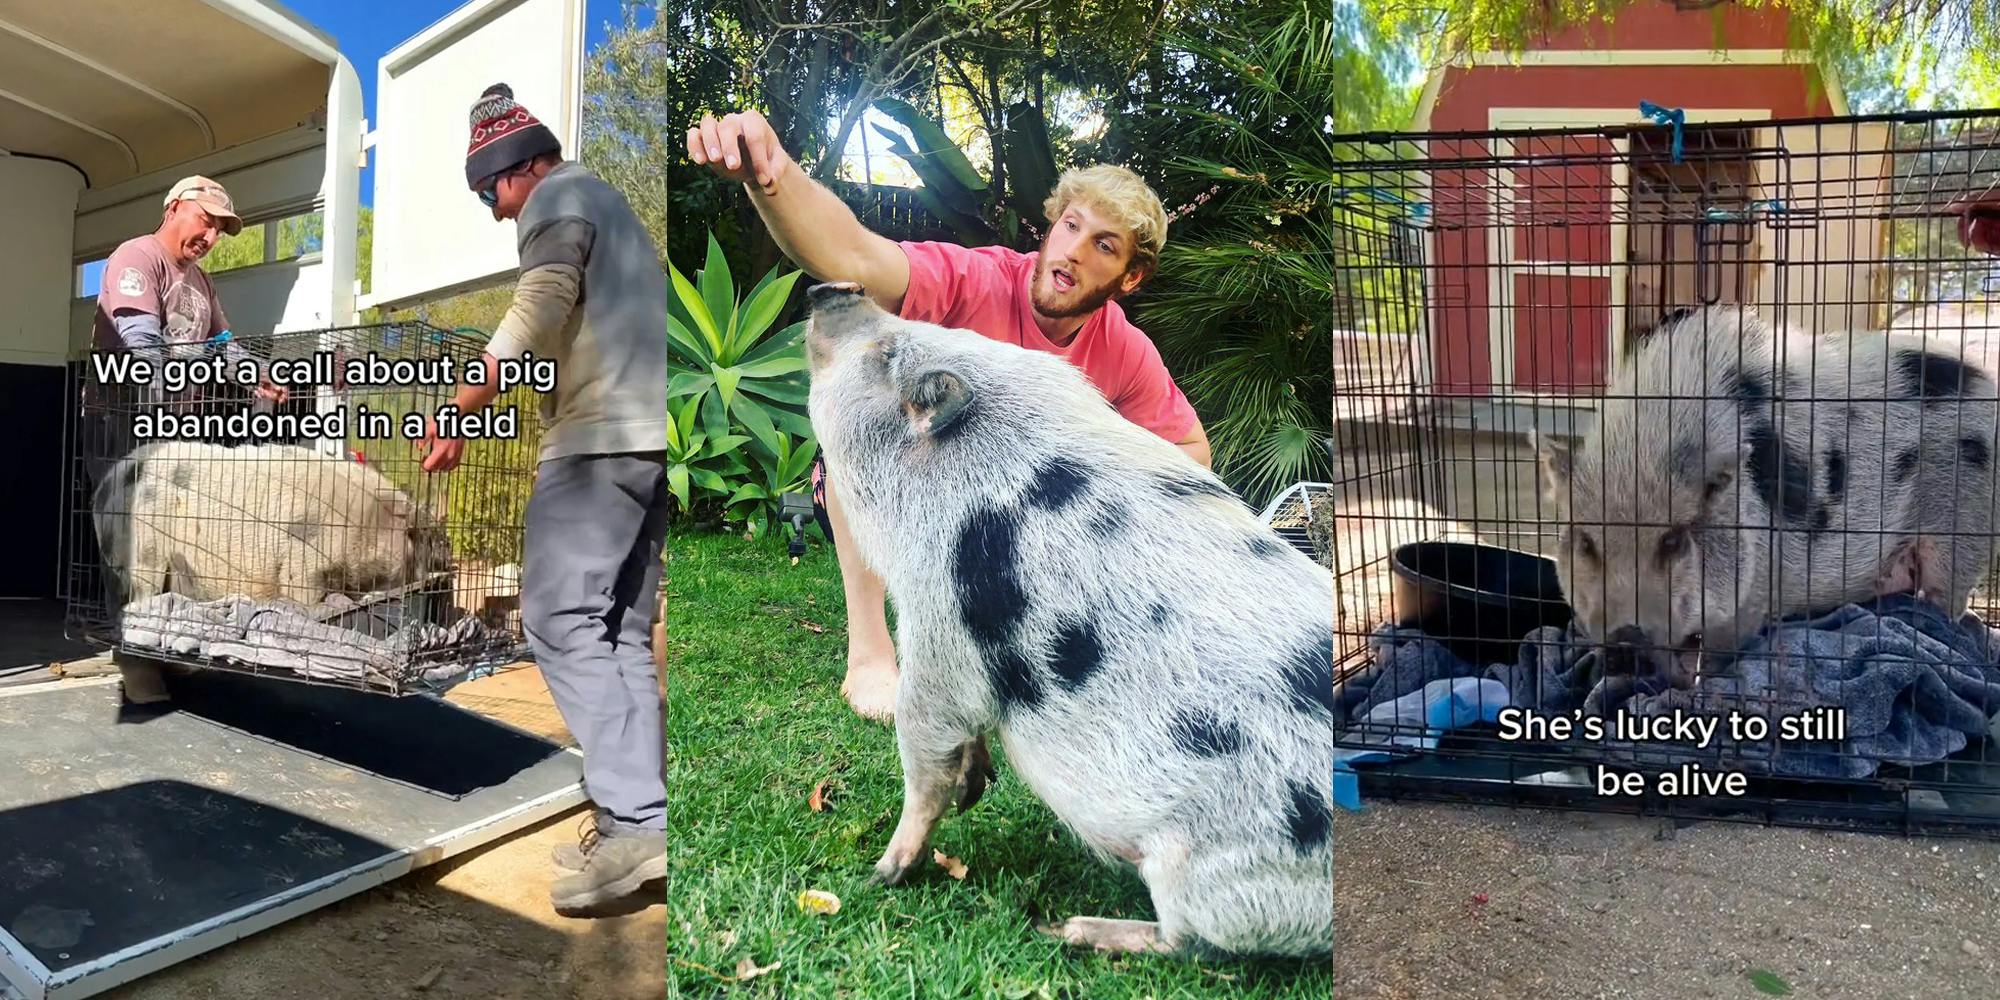 men carrying crate with pig inside out of trailer caption "We got a call about a pig abandoned in a field" (l) Logan Paul playing with pet pig in yard (c) pig in crate with caption "She's lucky to be alive" (r)